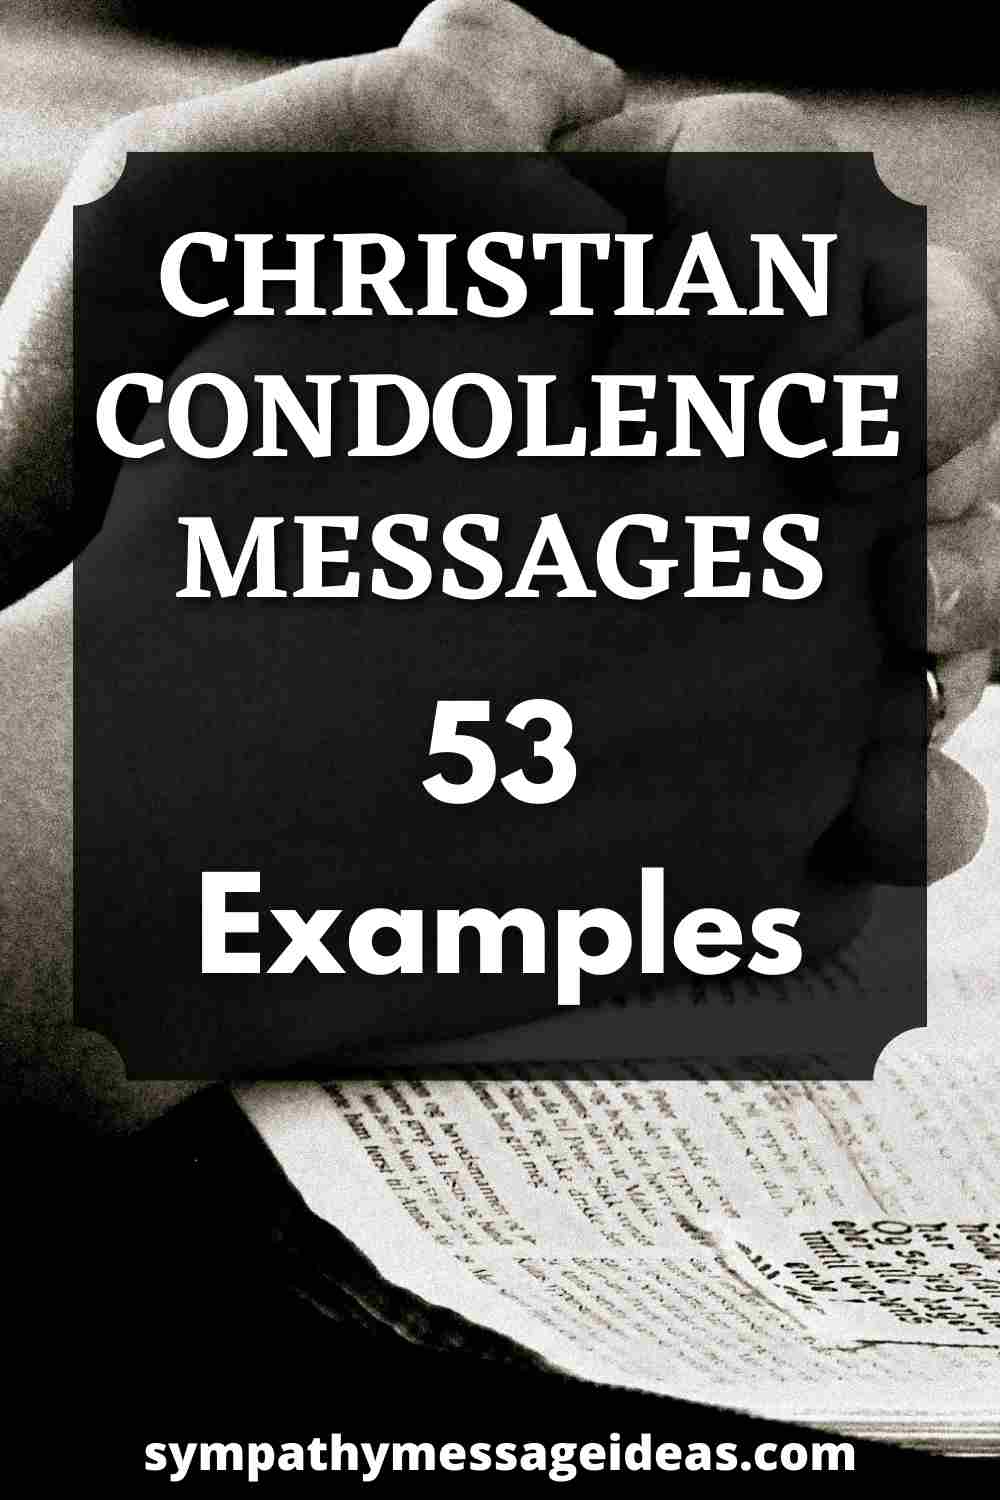 Christian condolence messages